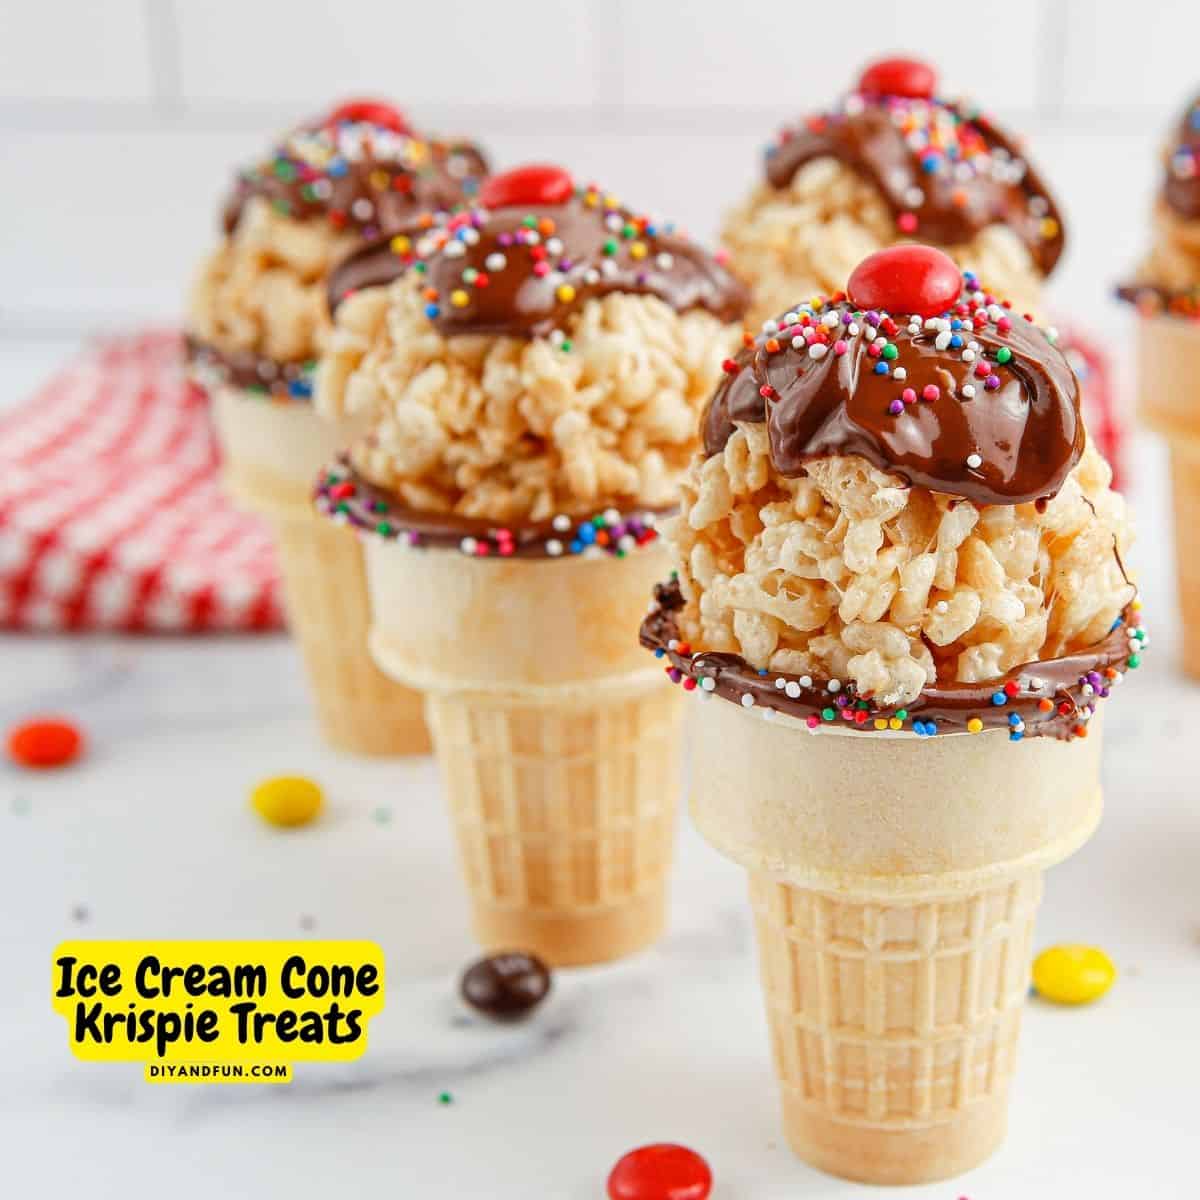 Ice Cream Cone Krispie Treats, an adorable and tasty dessert or snack treat featuring and ice cream cone filled with a tasty treat